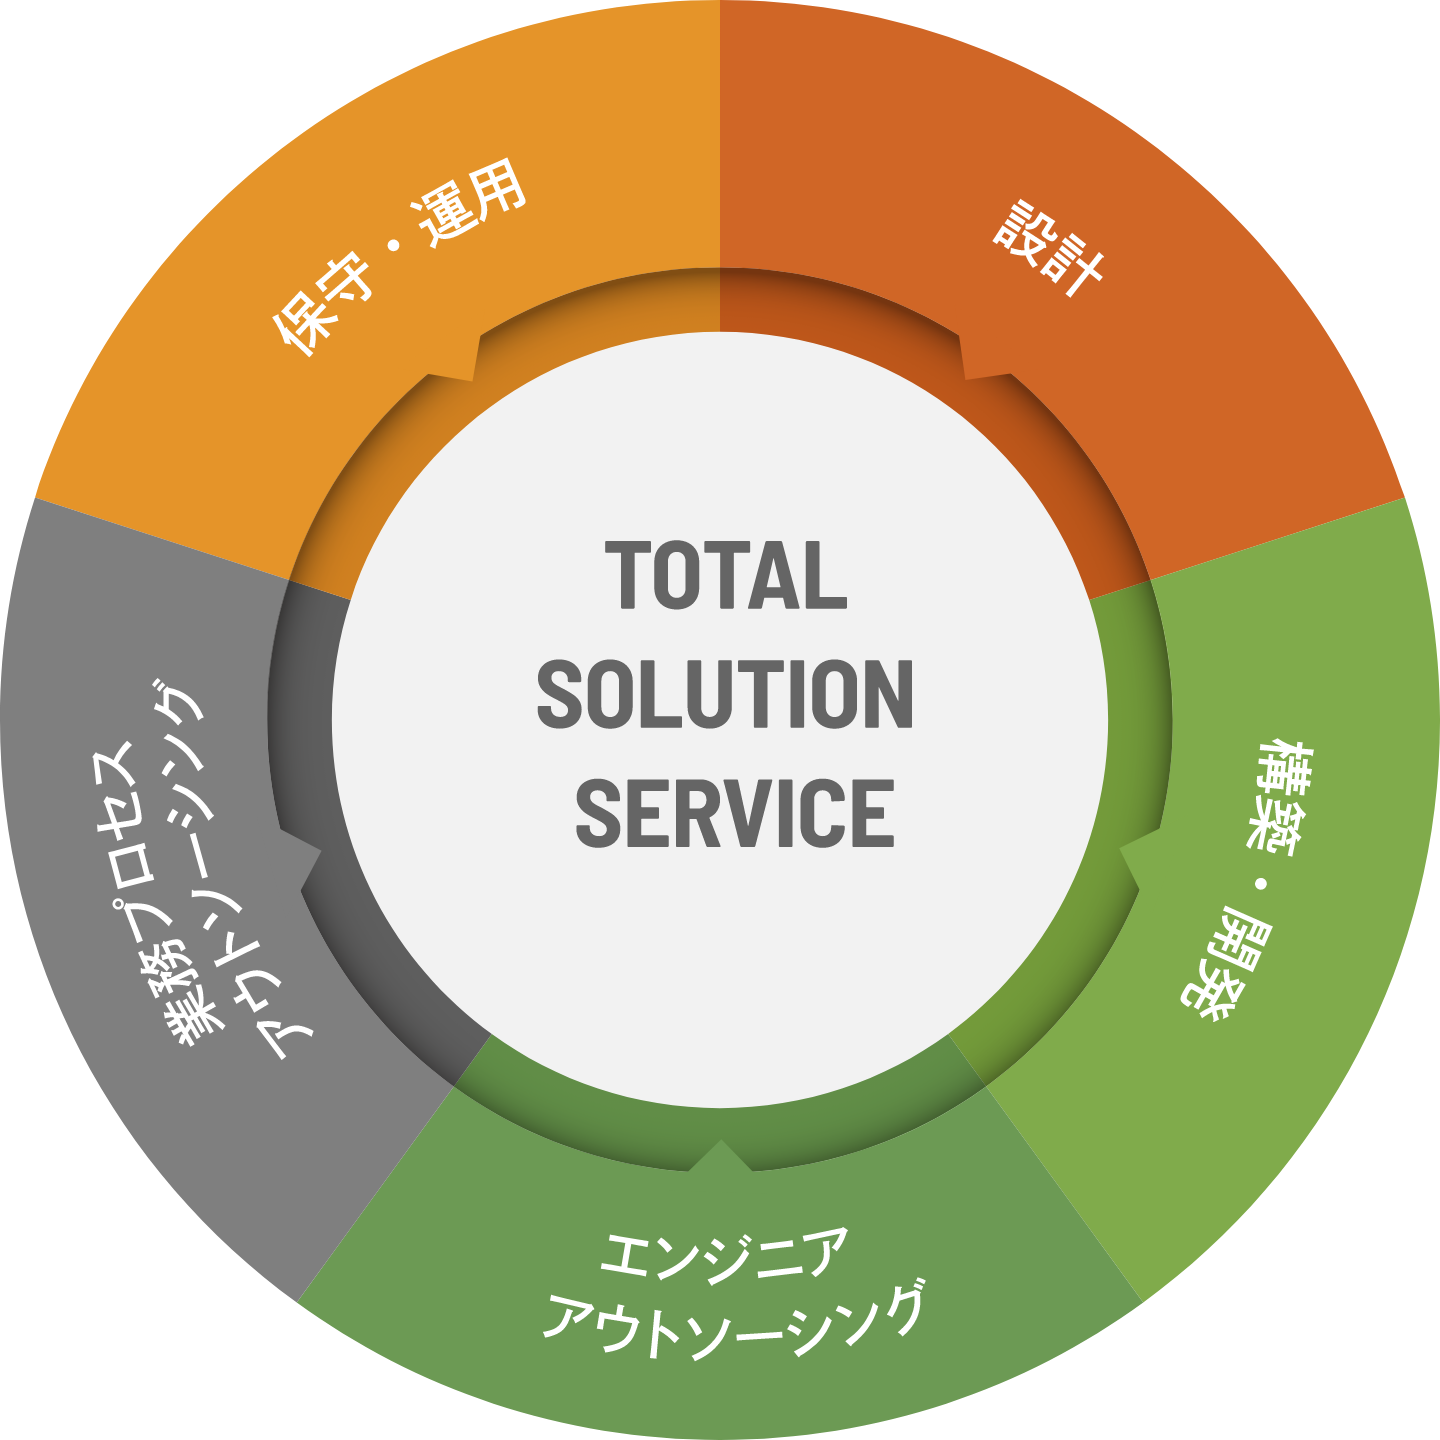 TOTAL SOLUTION SERVICE